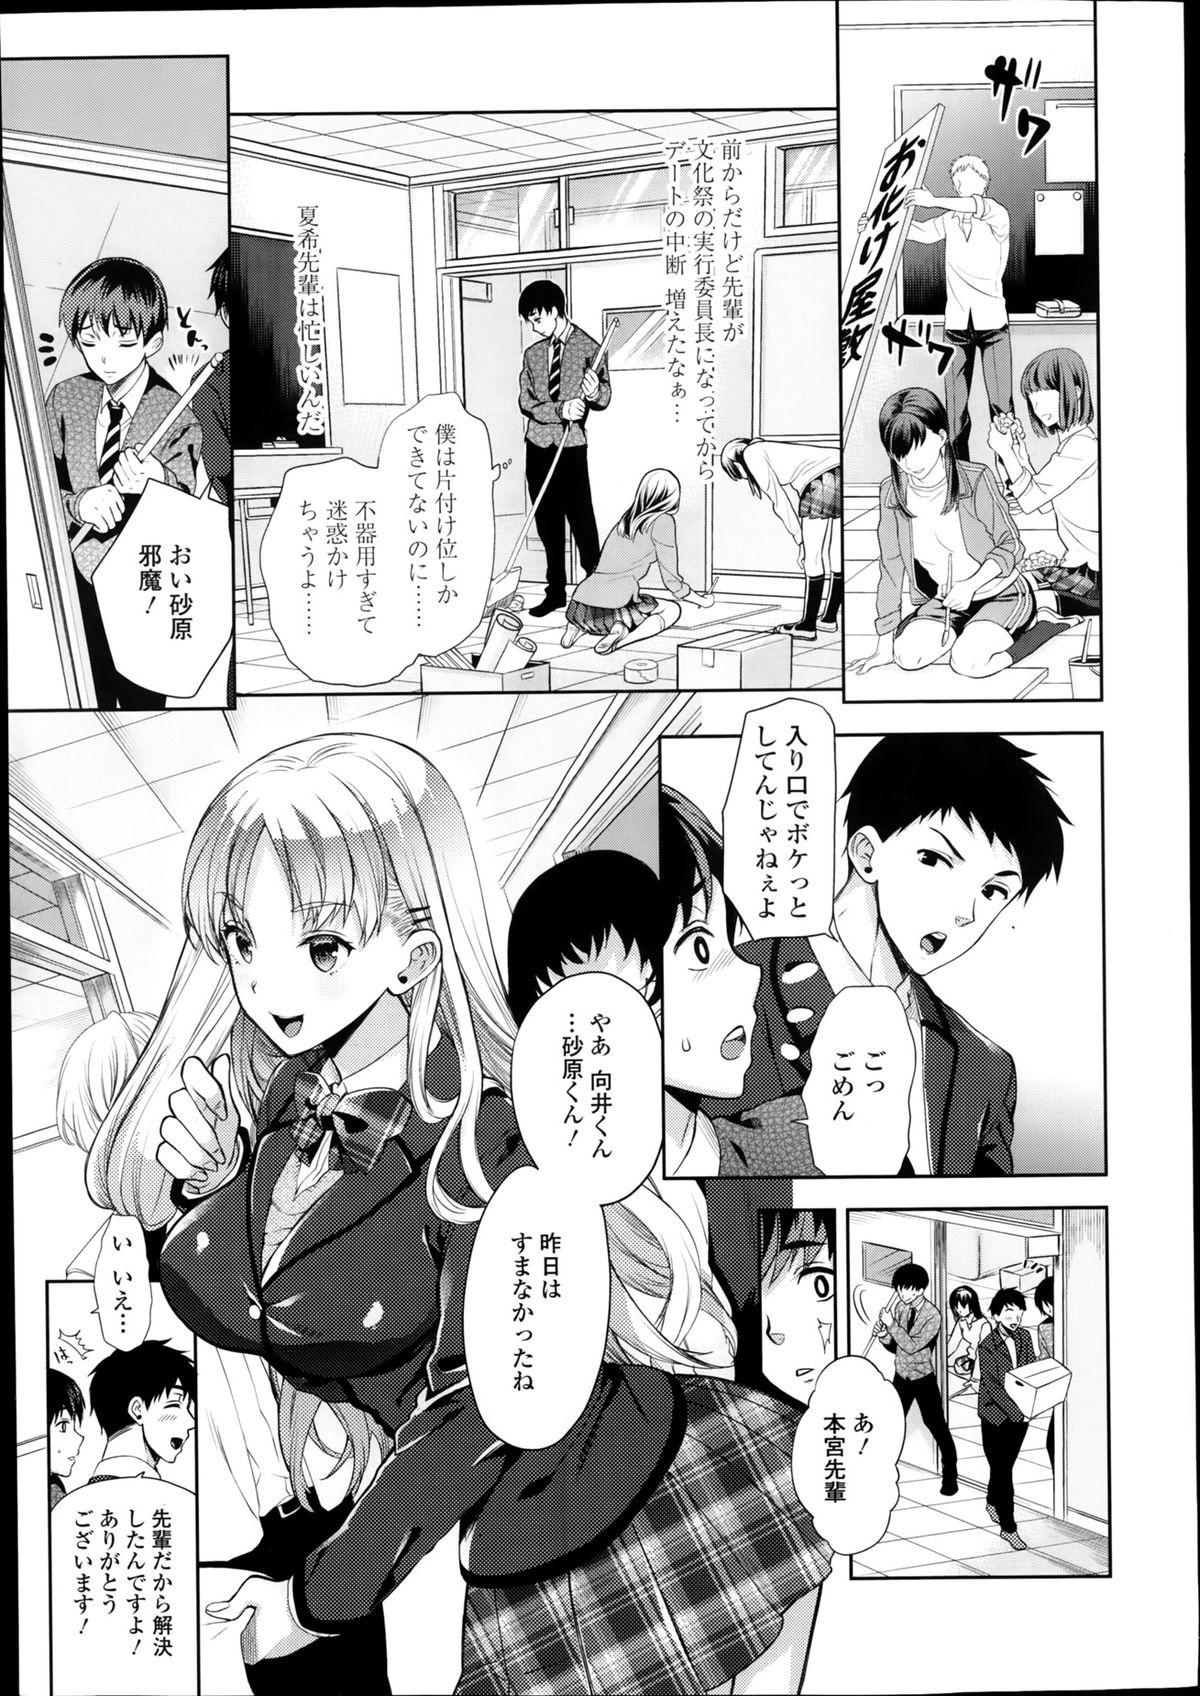 Pounded Comic Tenma 2014-01 Oral Sex - Page 7